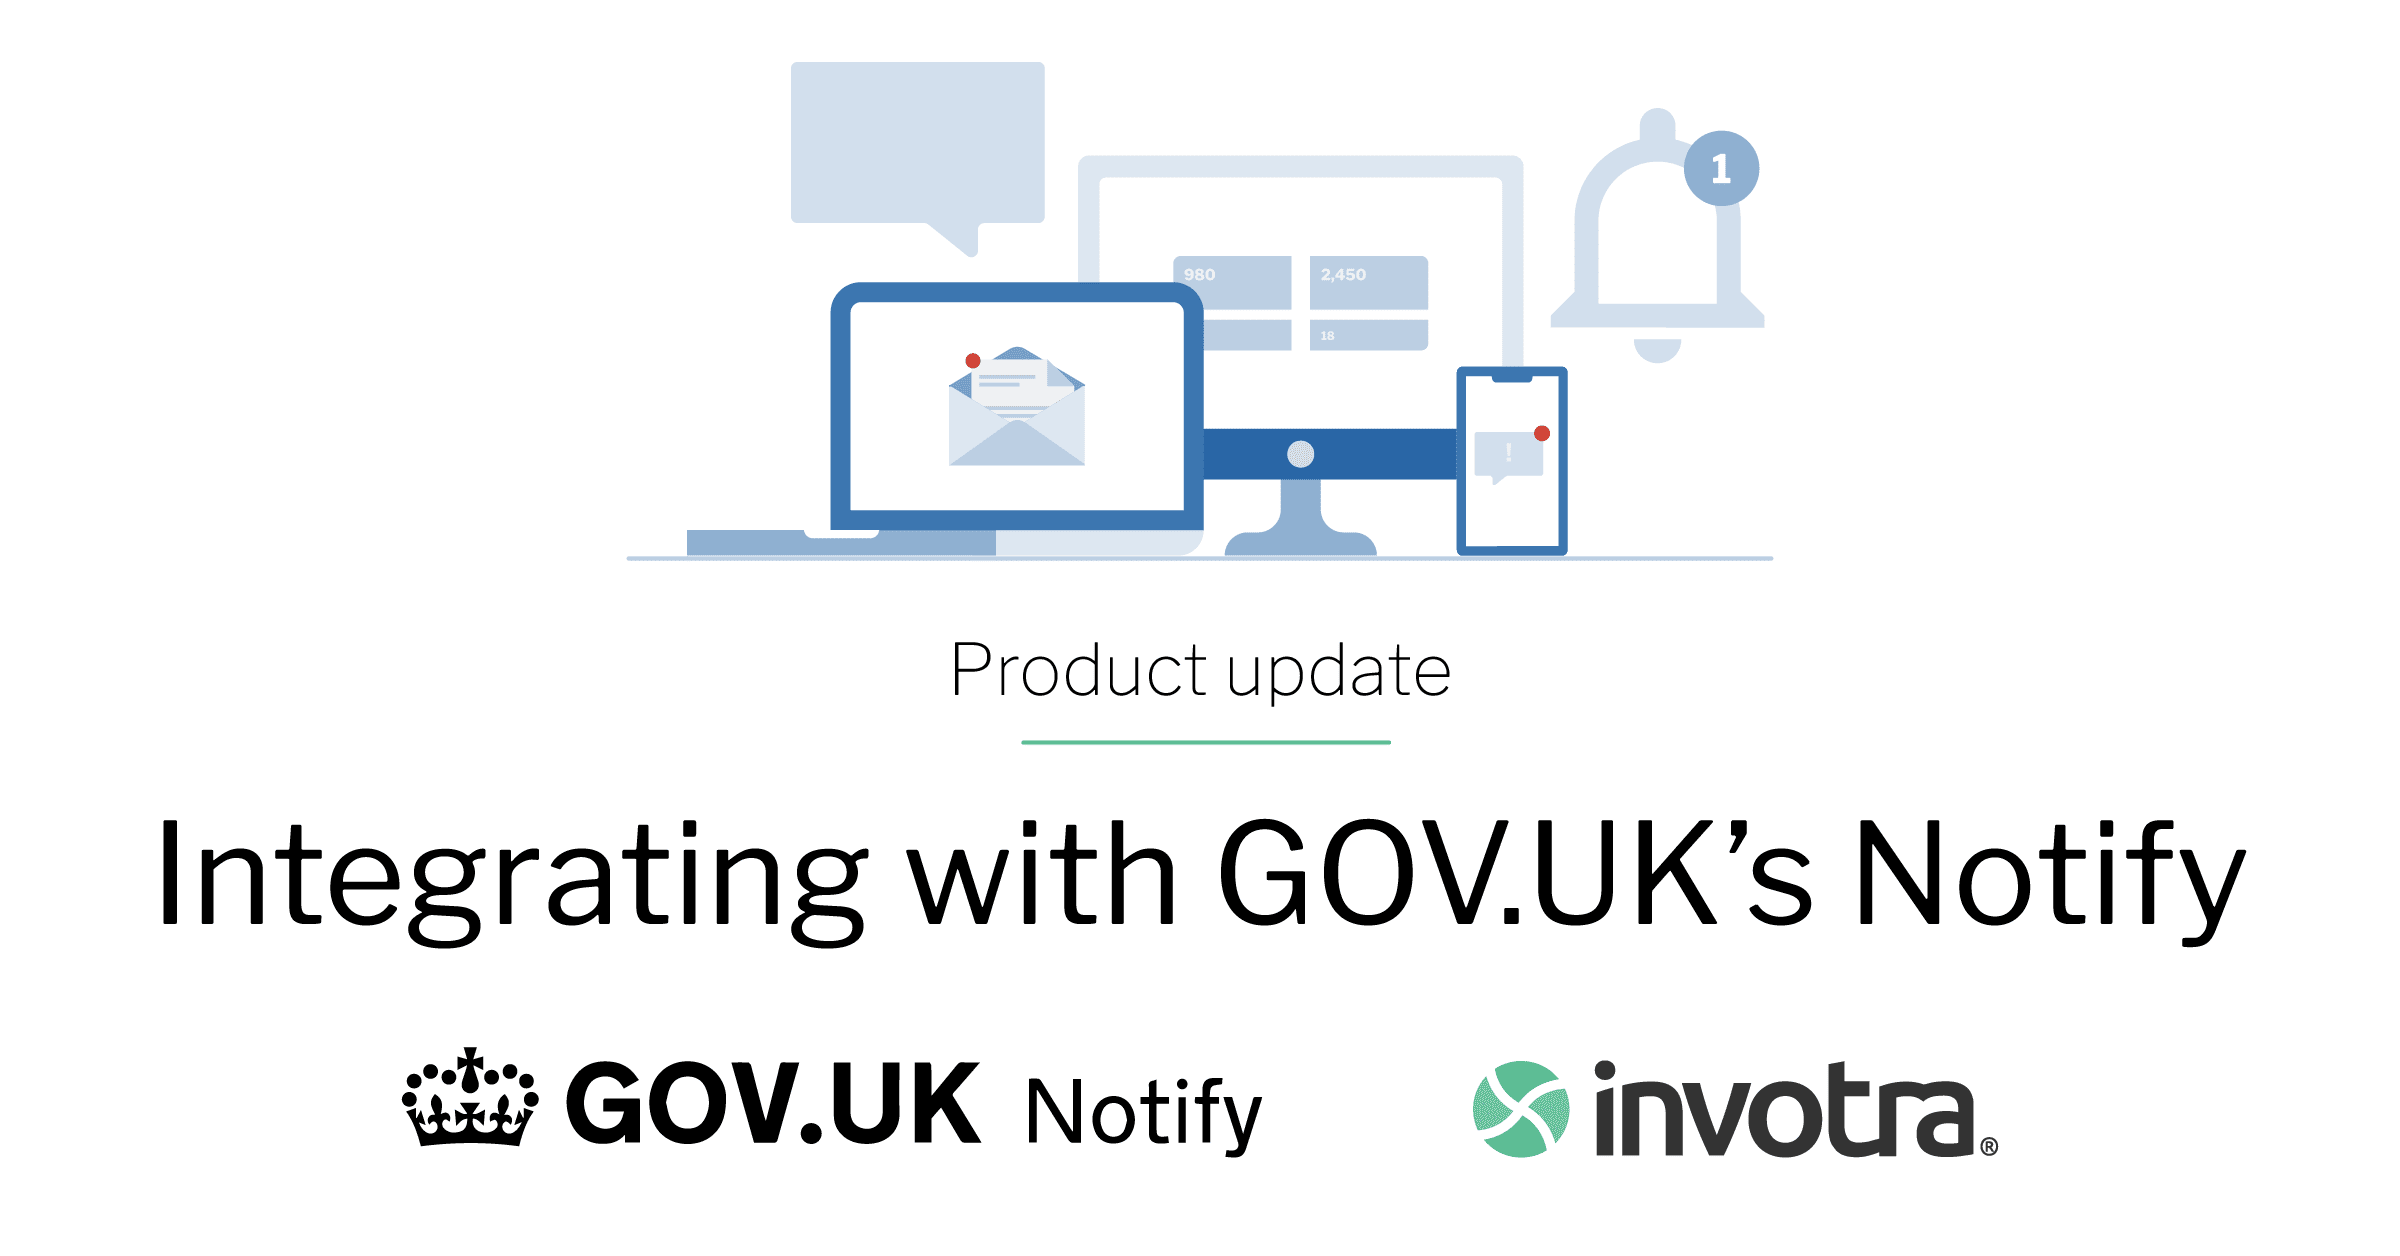 Integrating with Gov.uk's notify